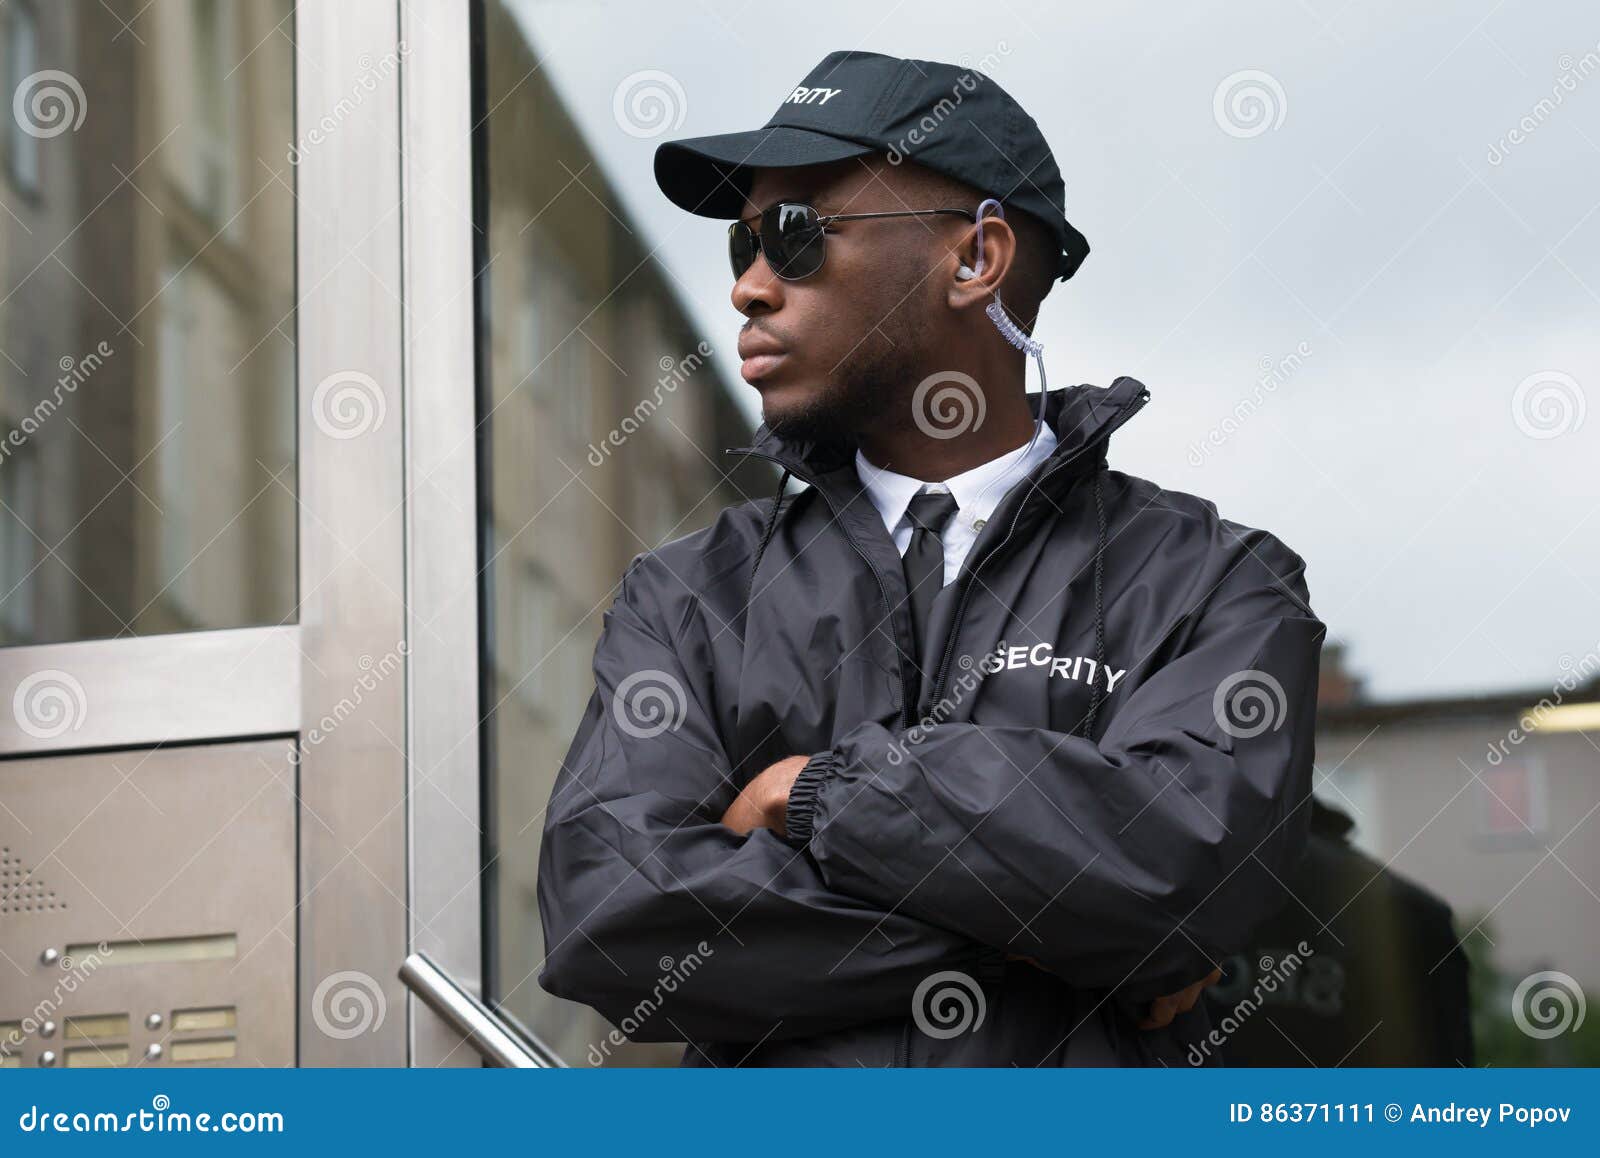 security guard standing arms crossed